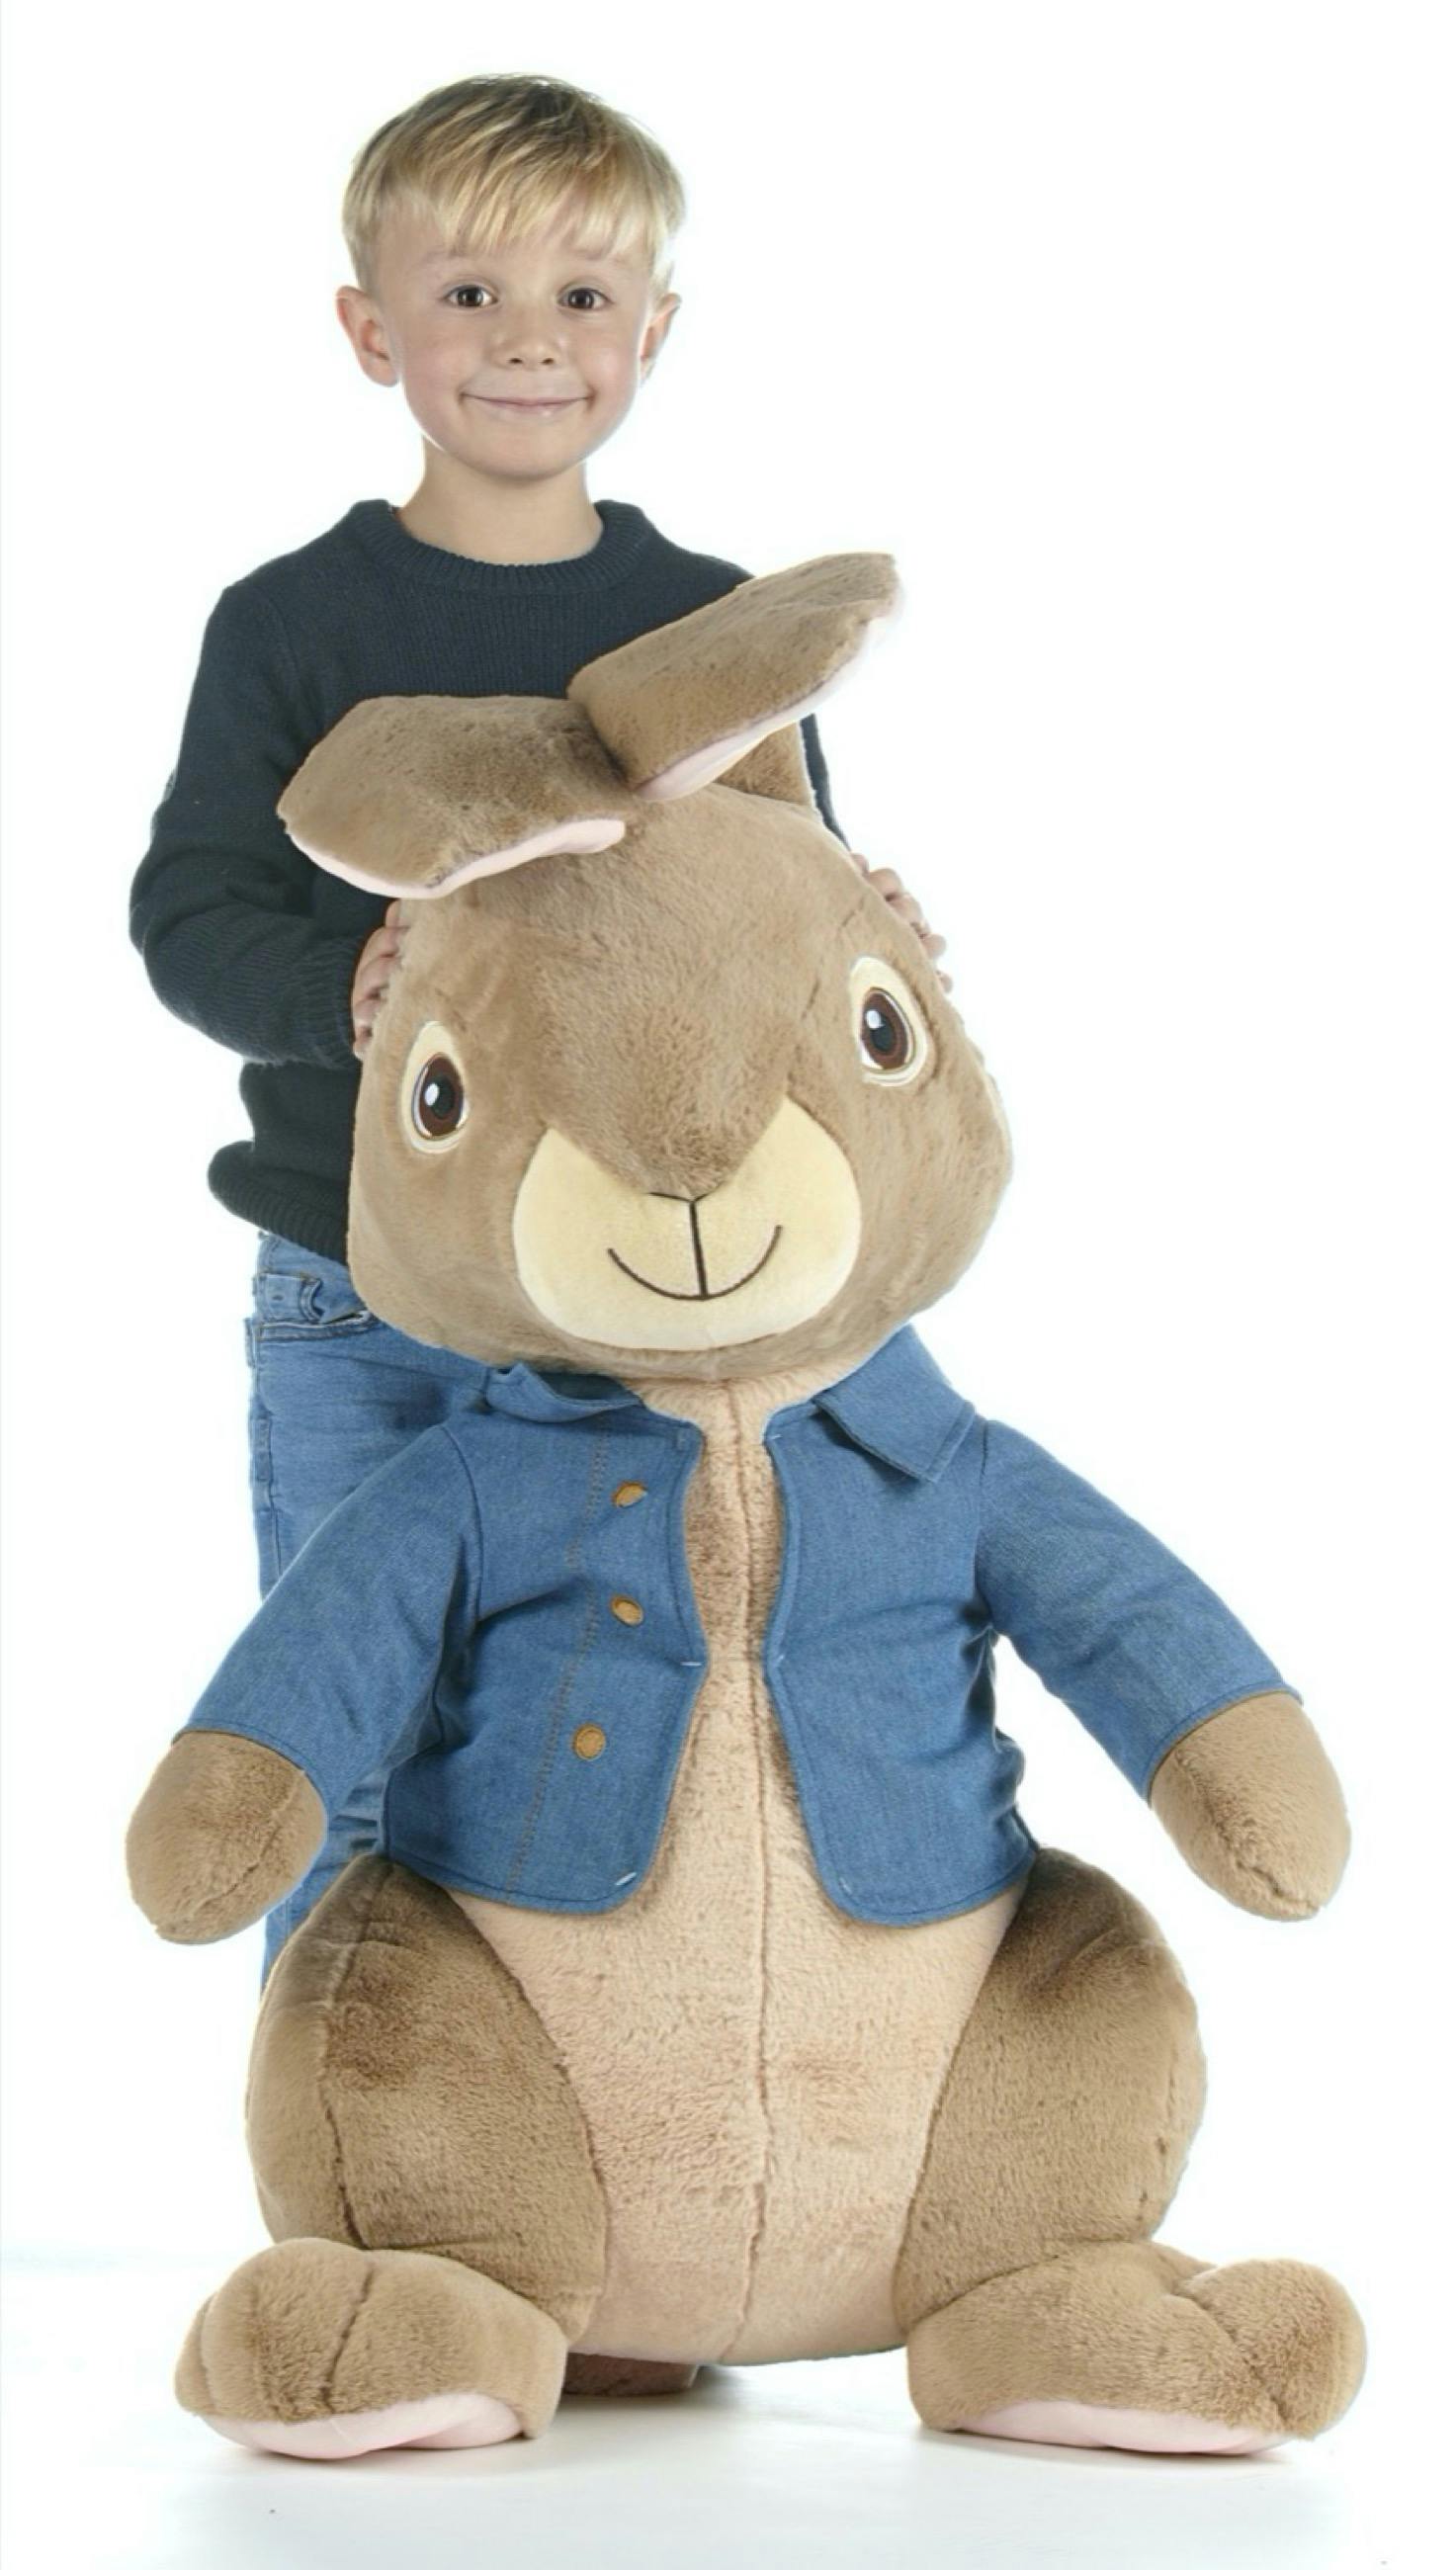 Product - Giant Peter Rabbit